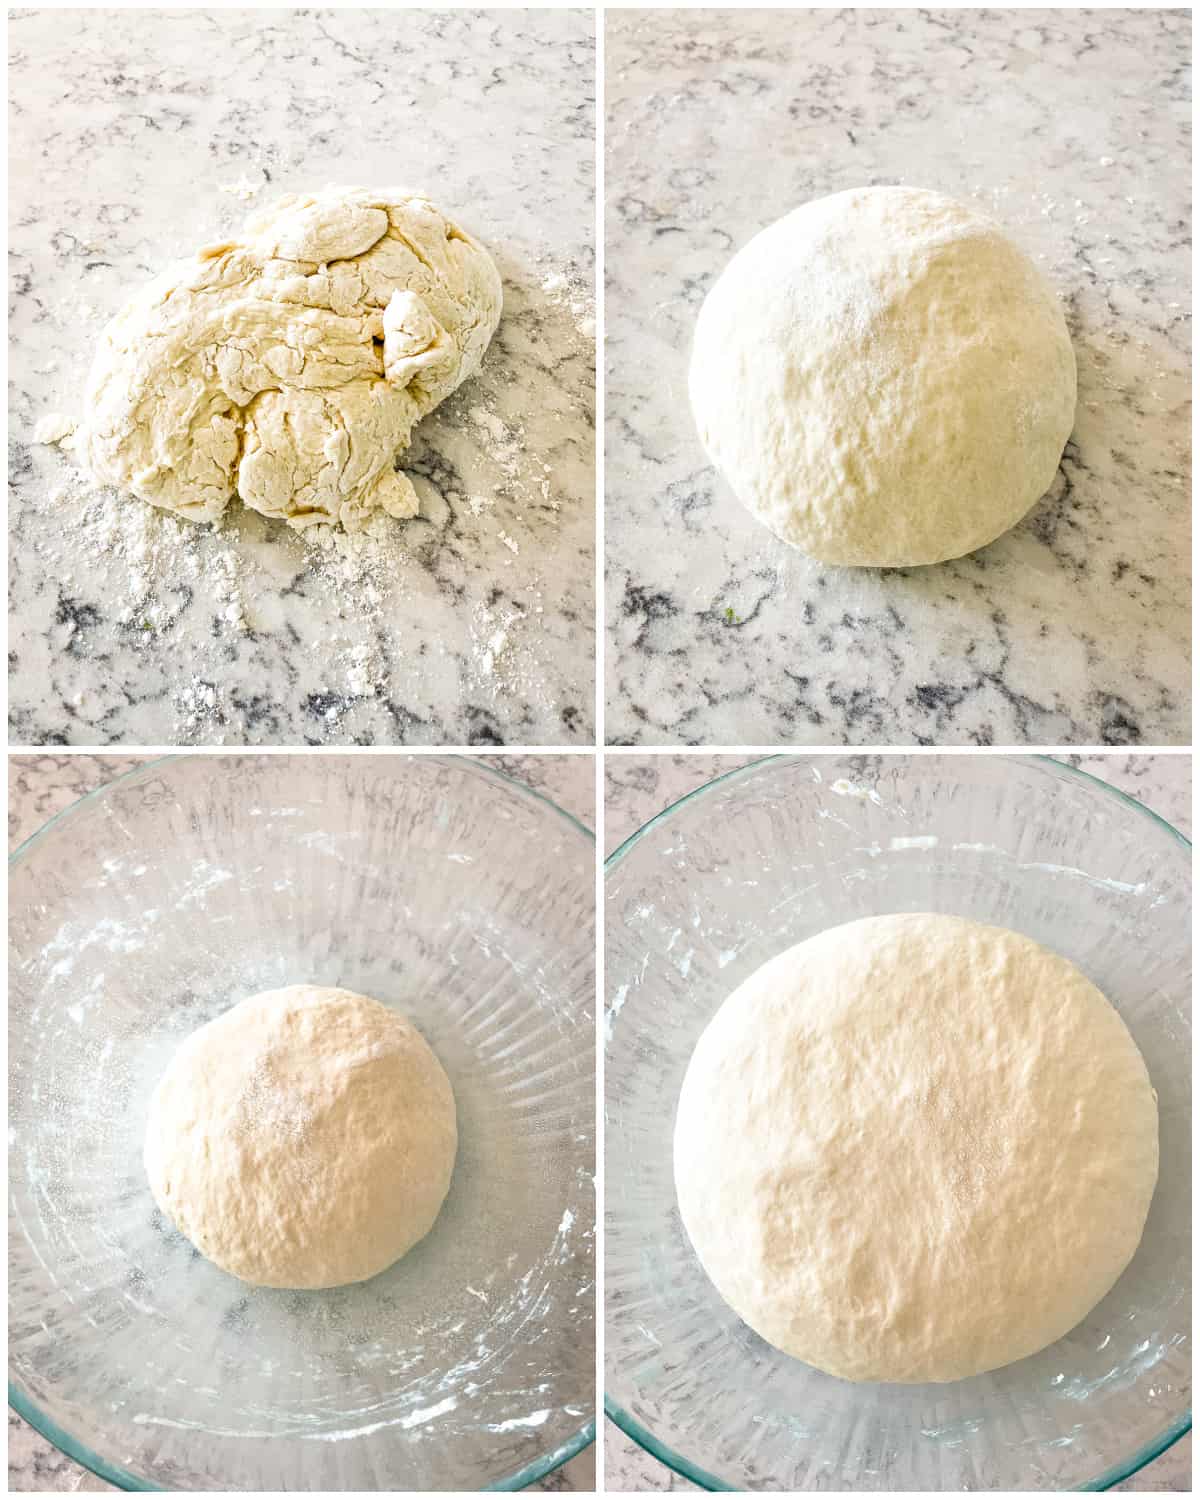 process shots - pizza dough kneaded and rising